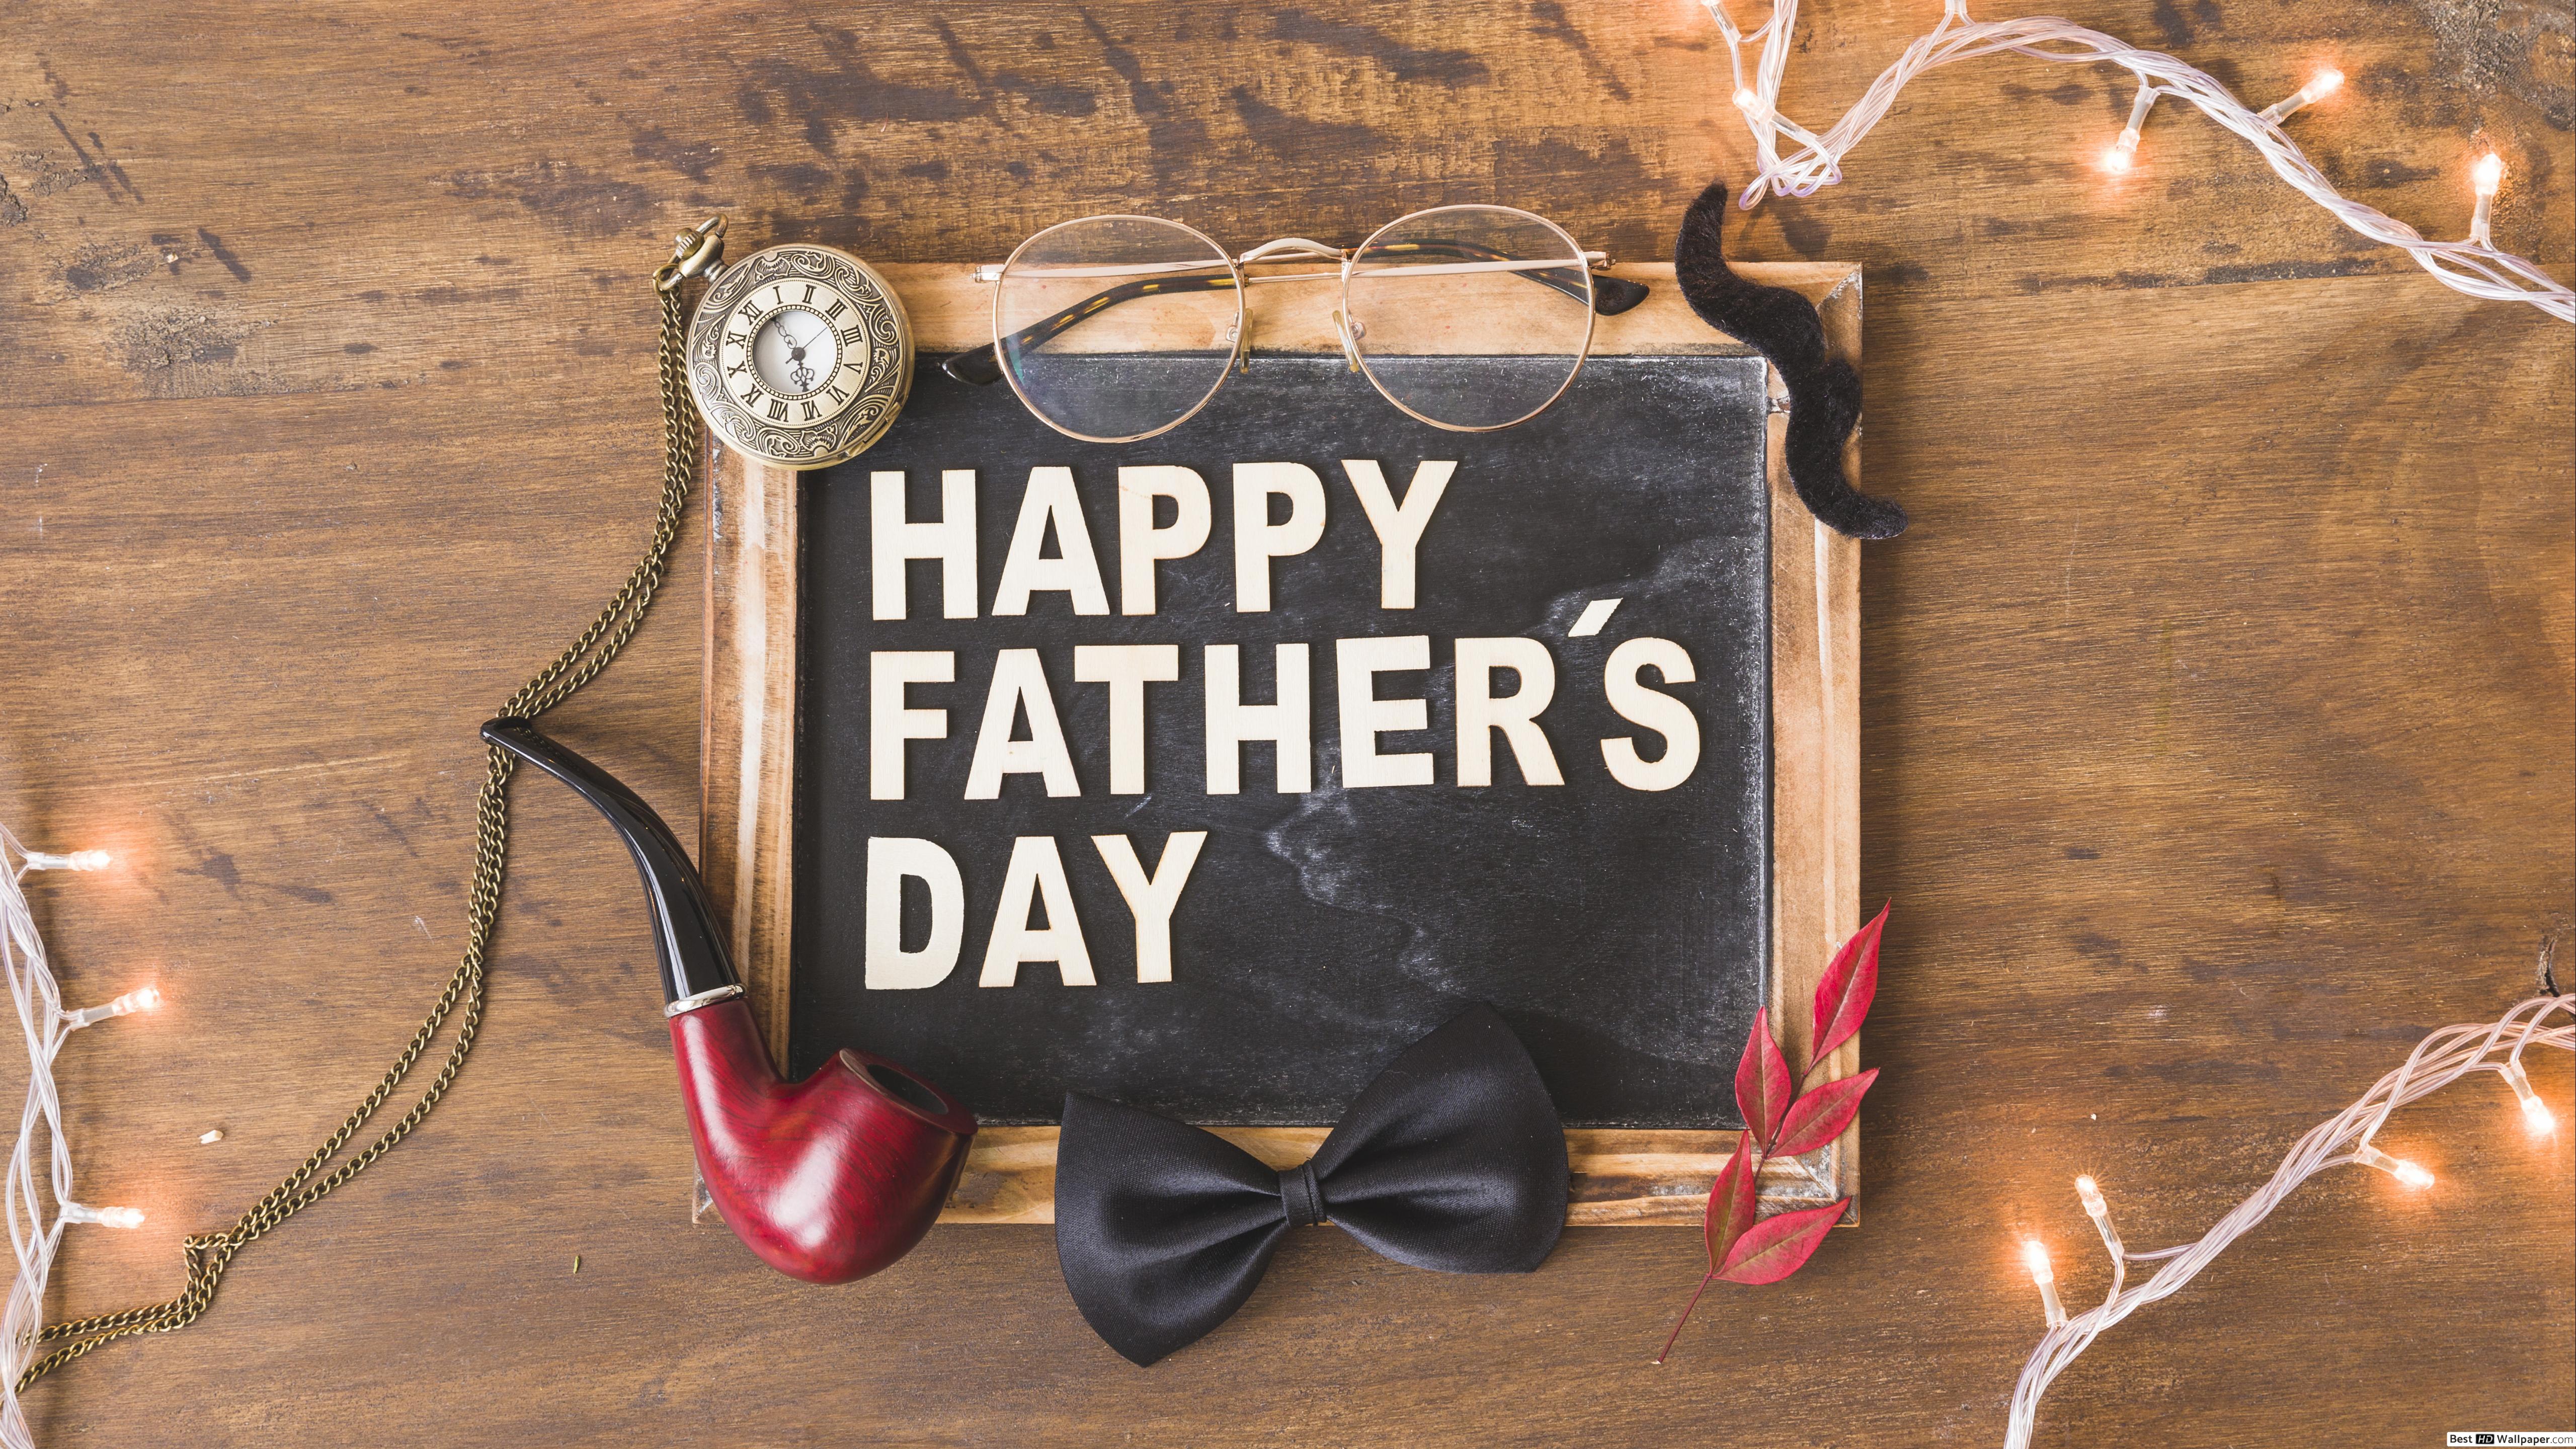 Happy Fathers Day Wallpaper For Iphone - HD Wallpaper 